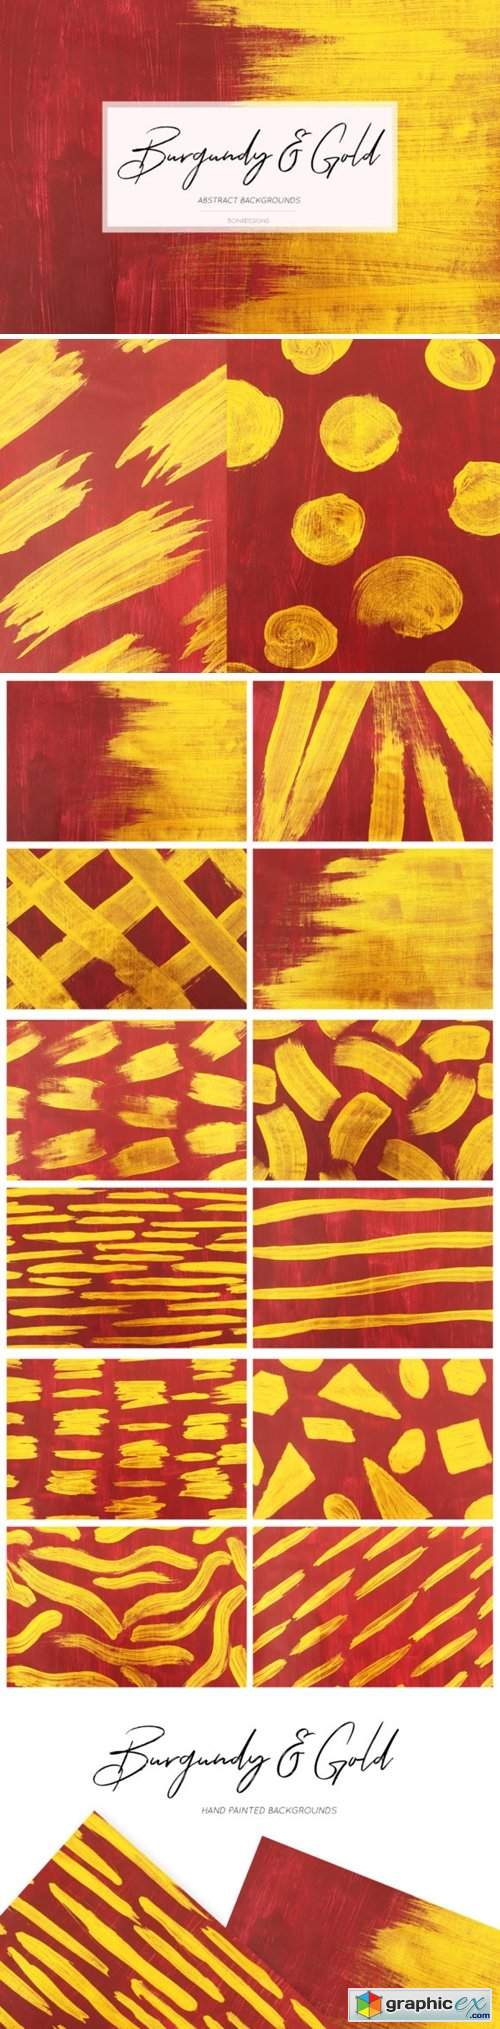 Burgundy & Gold Abstract Backgrounds